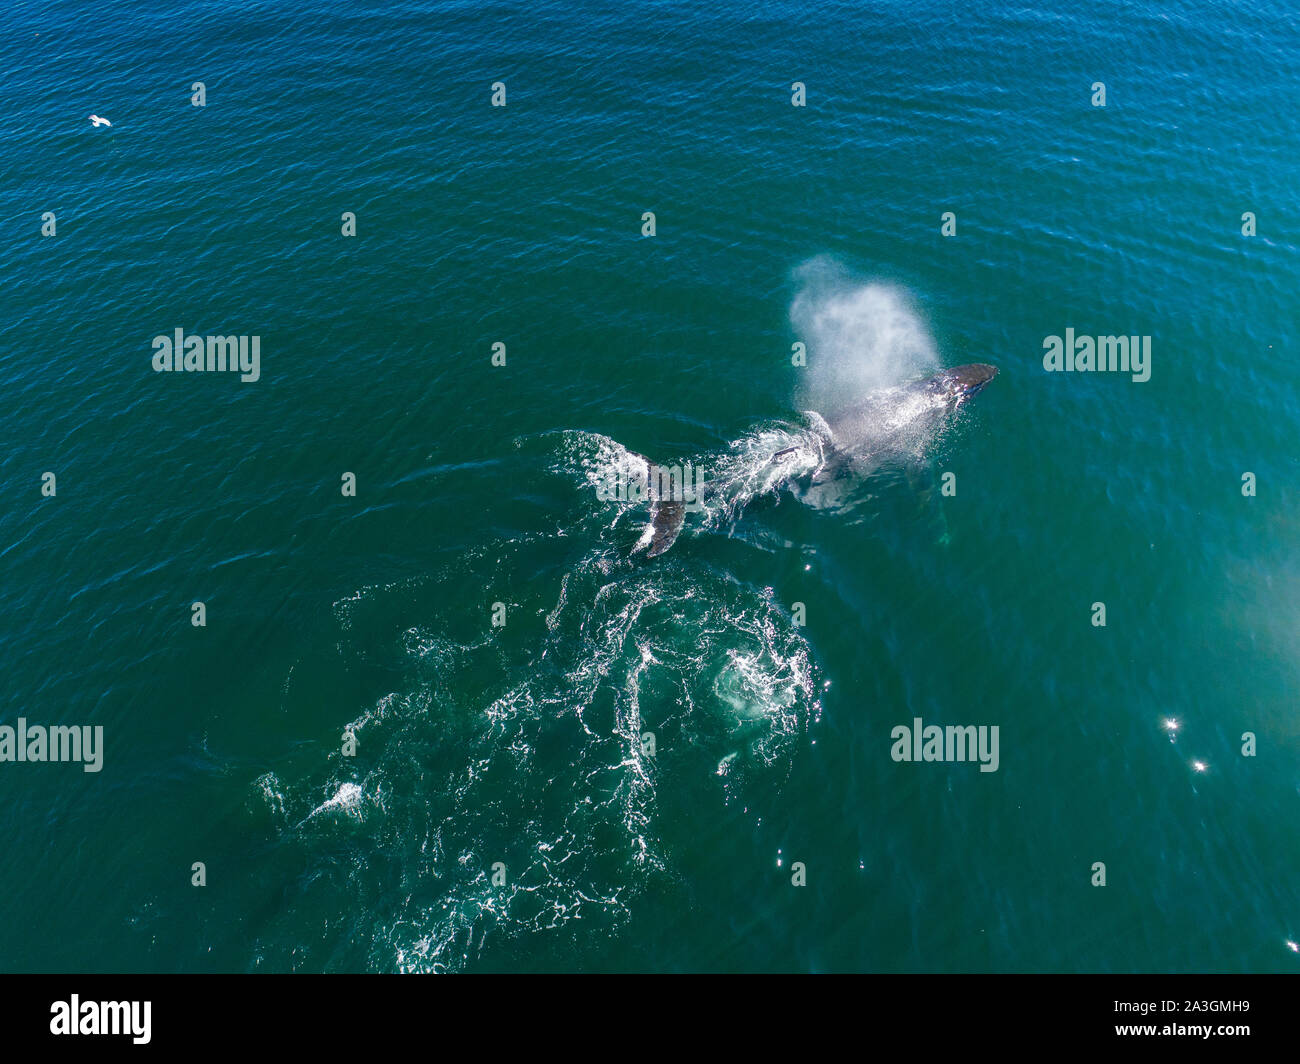 USA, Alaska, Aerial view of Humpback Whale (Megaptera novaeangliae) breathing at surface of Frederick Sound while bubble net feeding on herring shoal Stock Photo